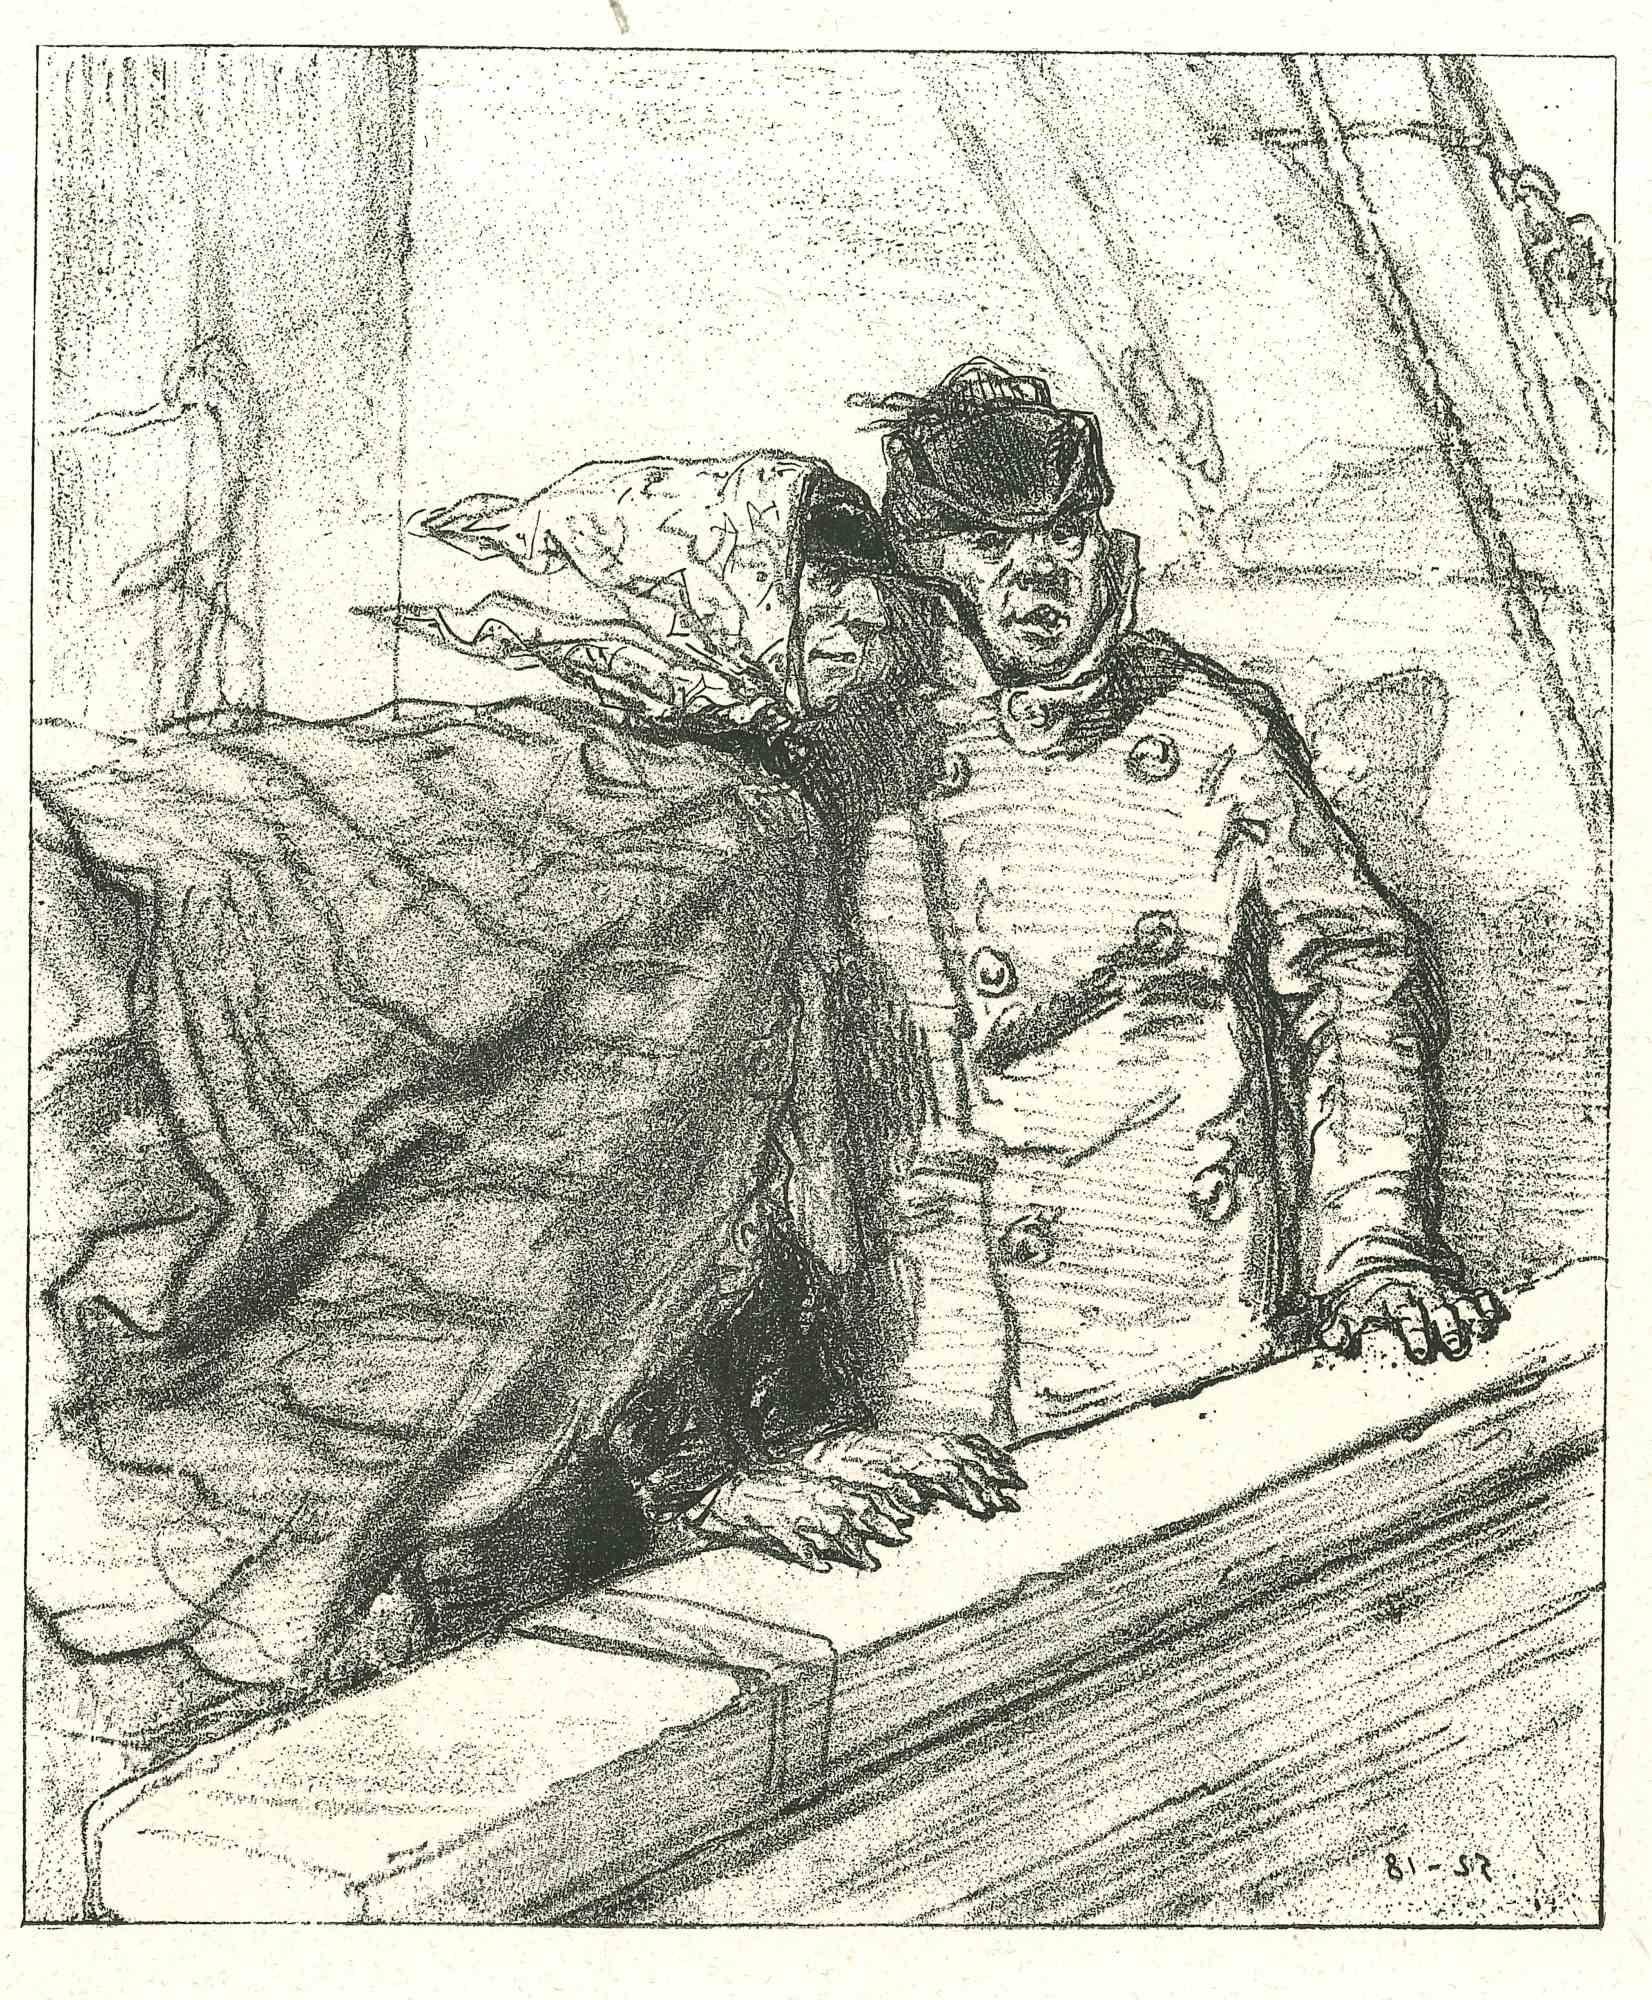 In the ship by wind is an original lithograph artwork on ivory-colored paper, realized by the French draftsman Paul Gavarni (after) (alias Guillaume Sulpice Chevalier Gavarni, 1804-1866) in Paris, 1881, in the collection of Illustrations for "La